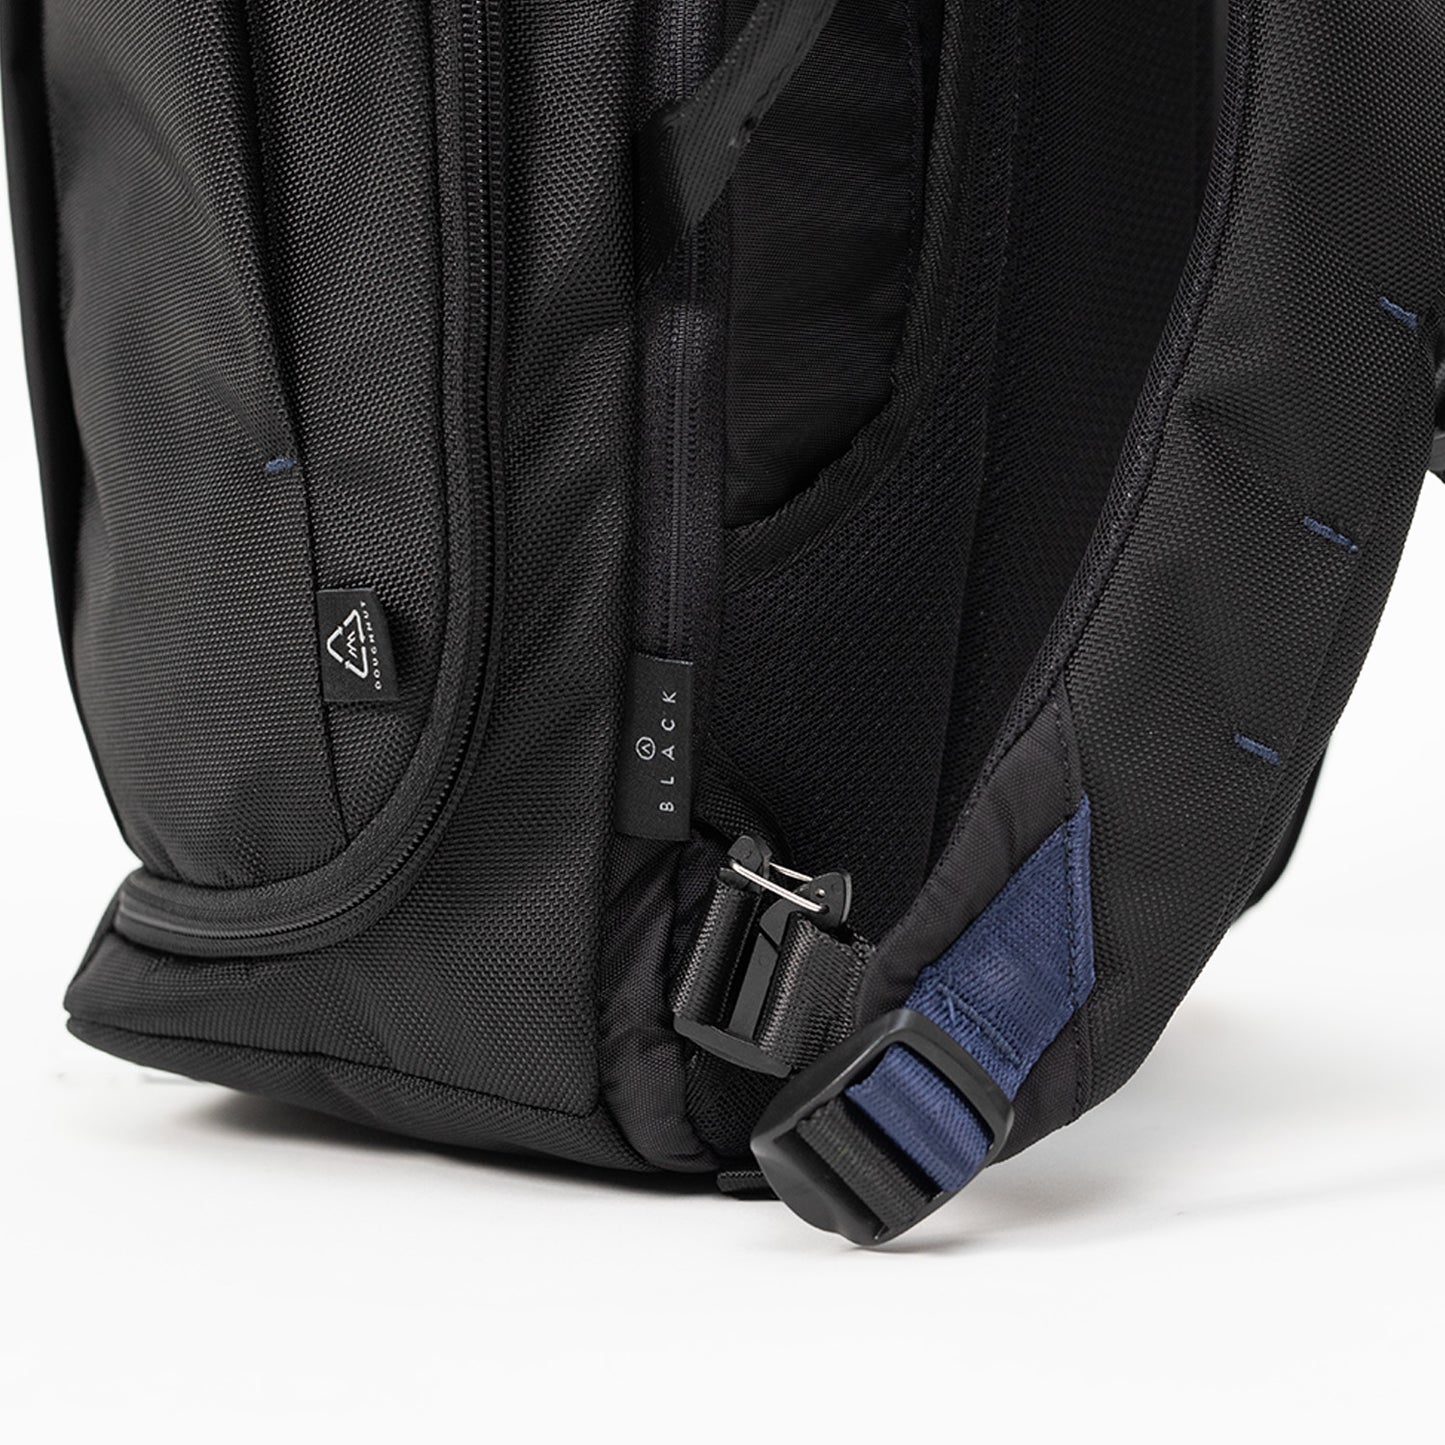 Sturdy The Actualise Series Backpack